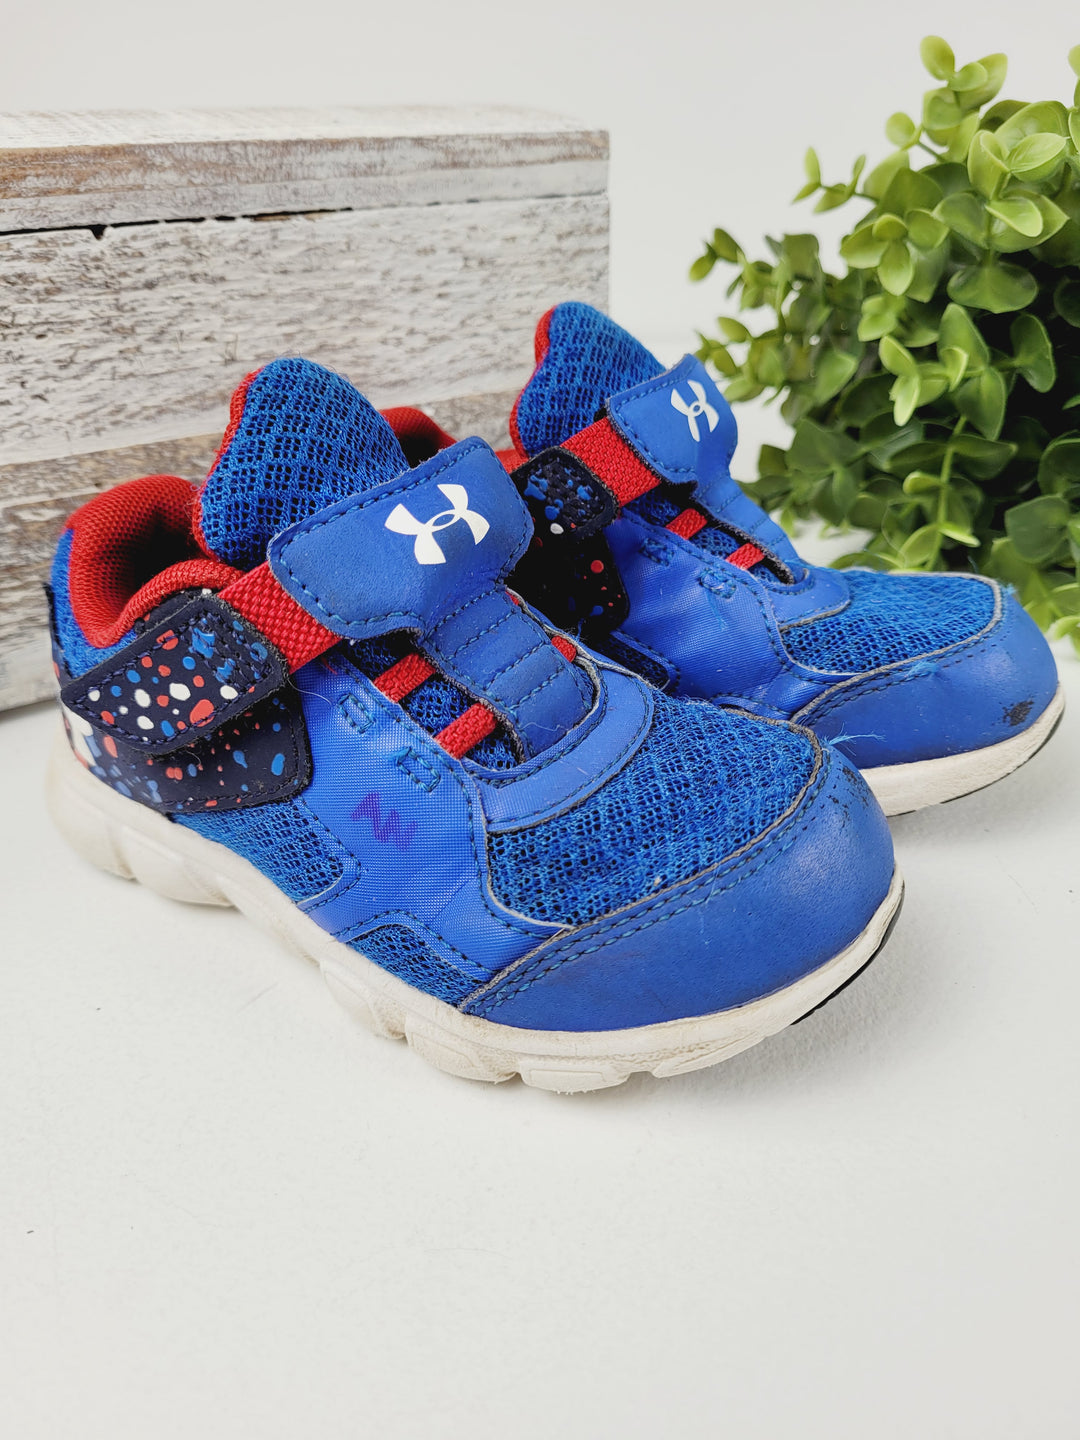 UNDER ARMOUR BLUE RUNNING SHOES SIZE 7C VGUC/PC